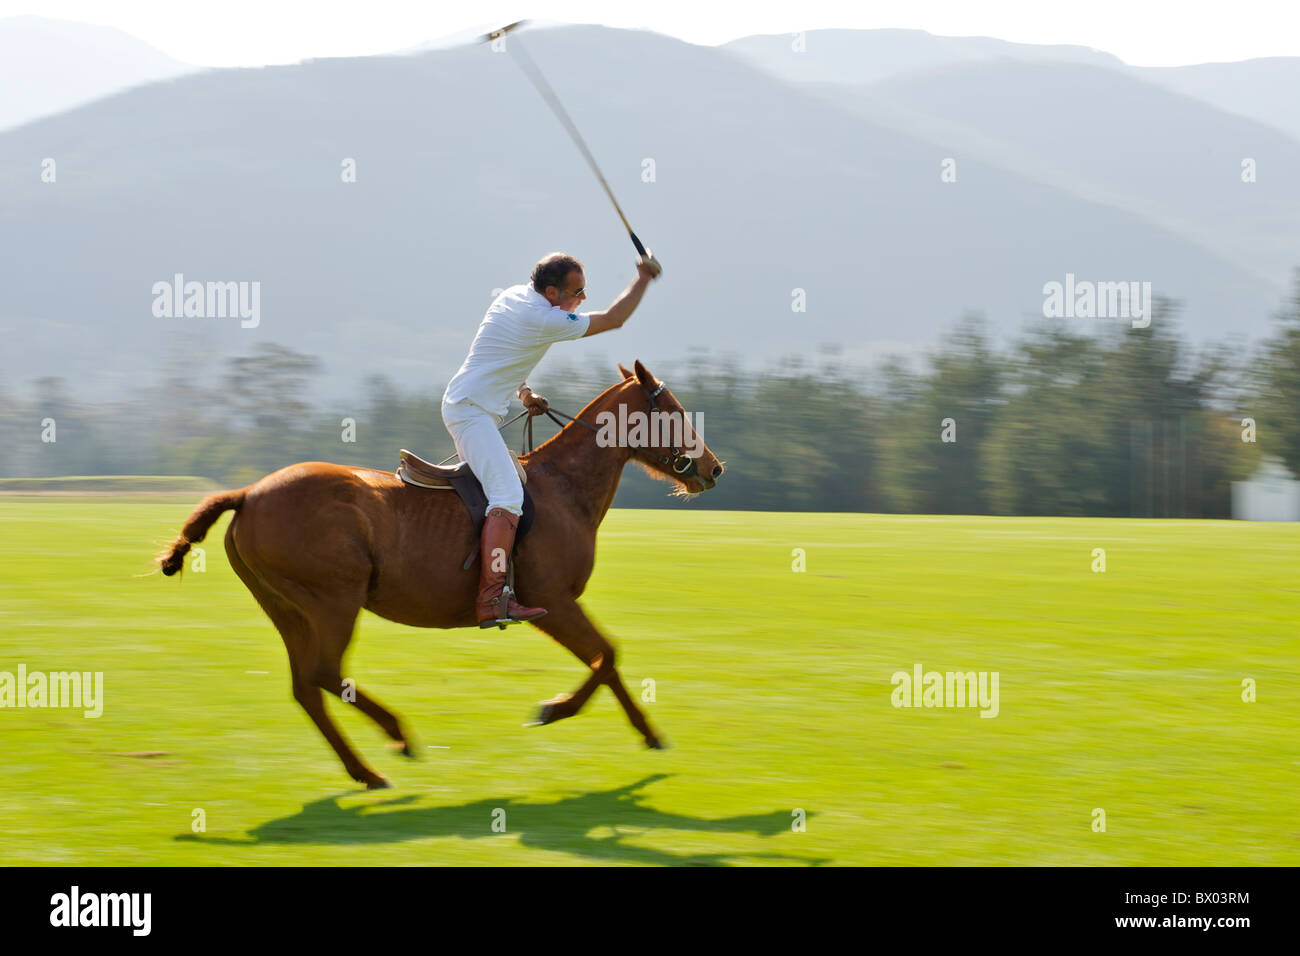 Practising polo on the Kurland estate in Plettenberg Bay on the Garden Route in South Africa. Stock Photo